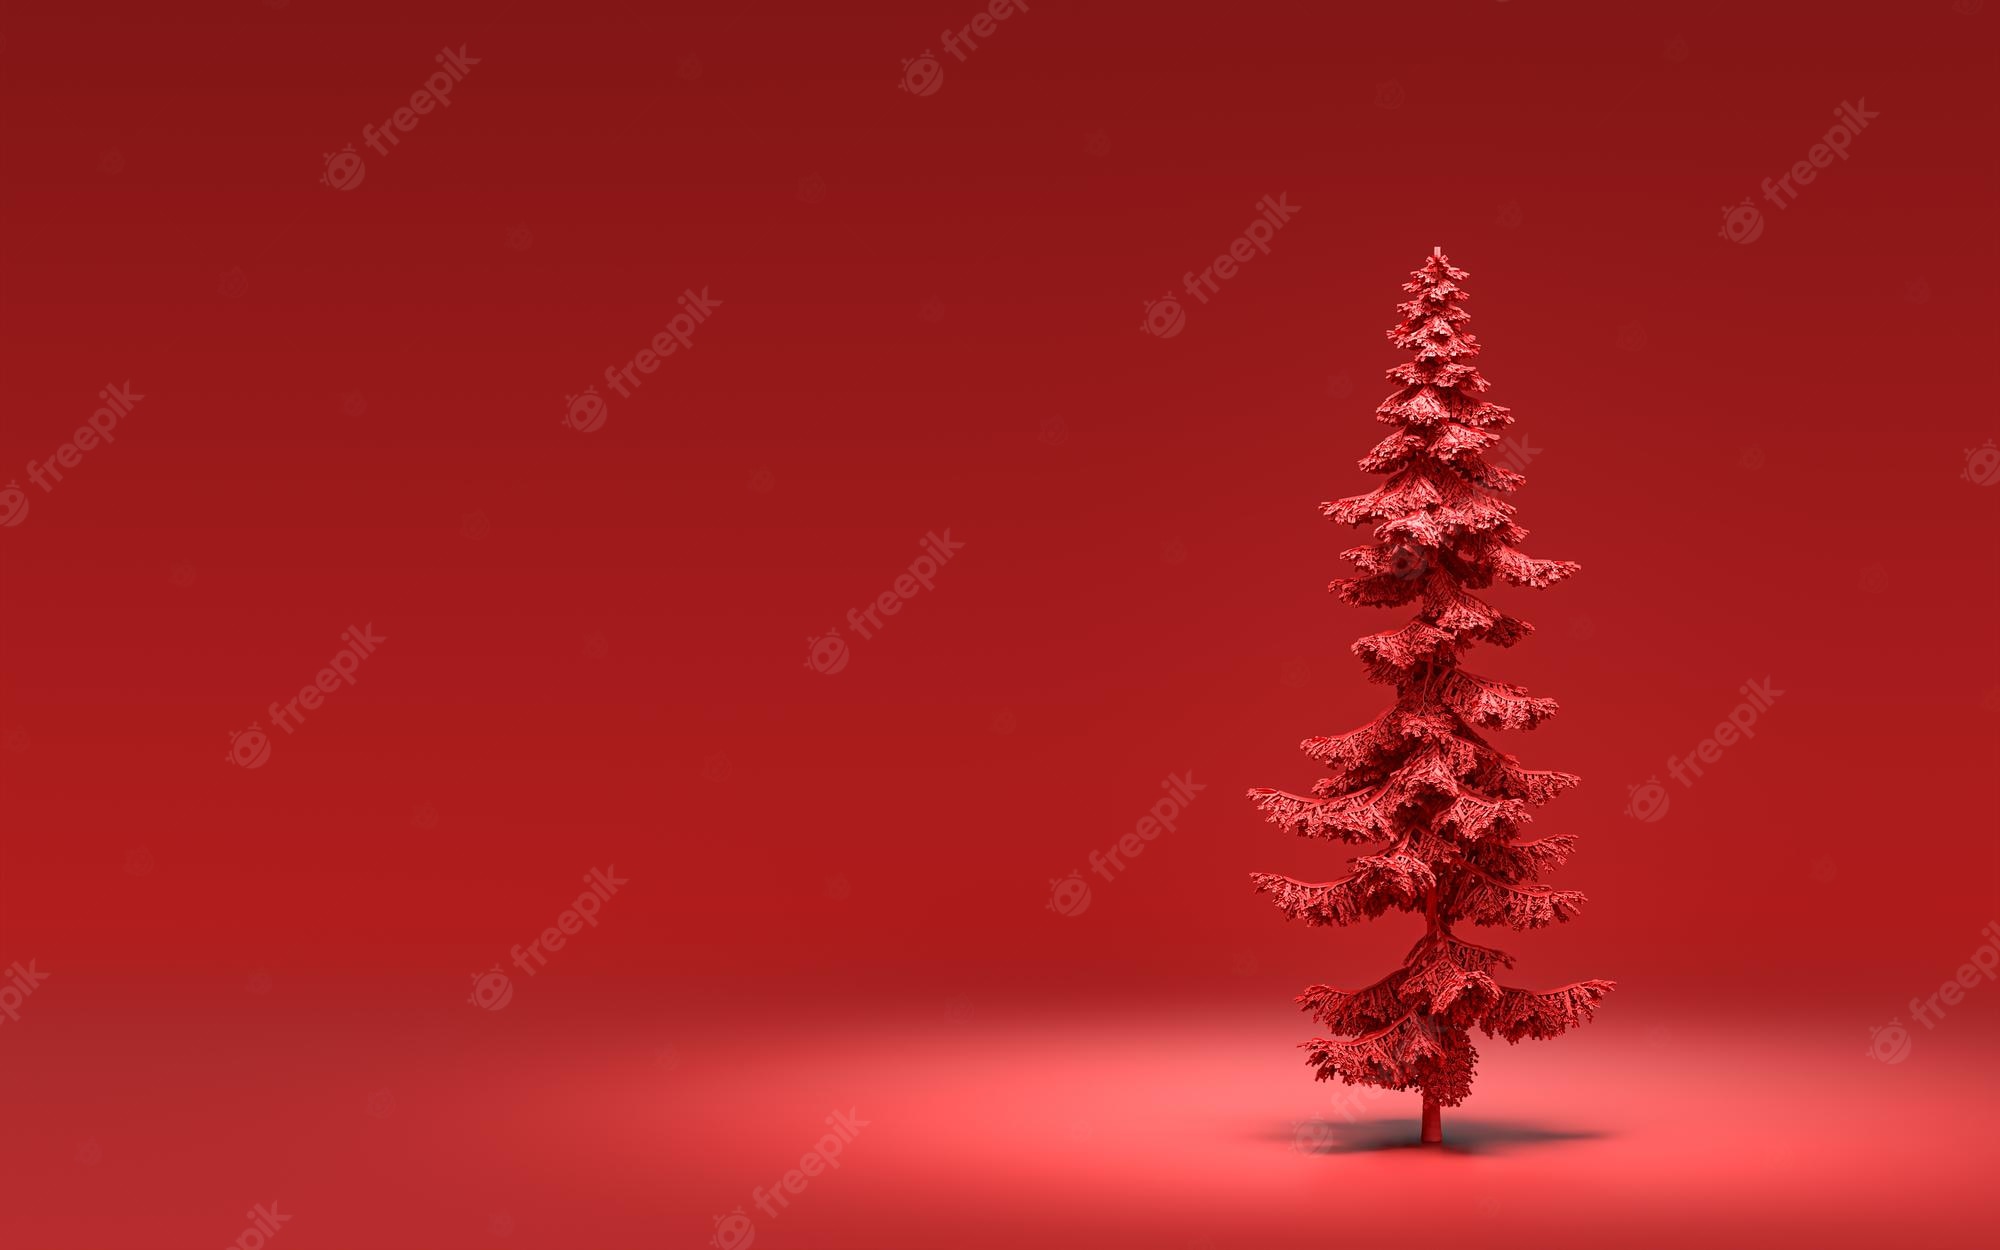 Premium Photo Single Christmas Tree Without Ornaments With